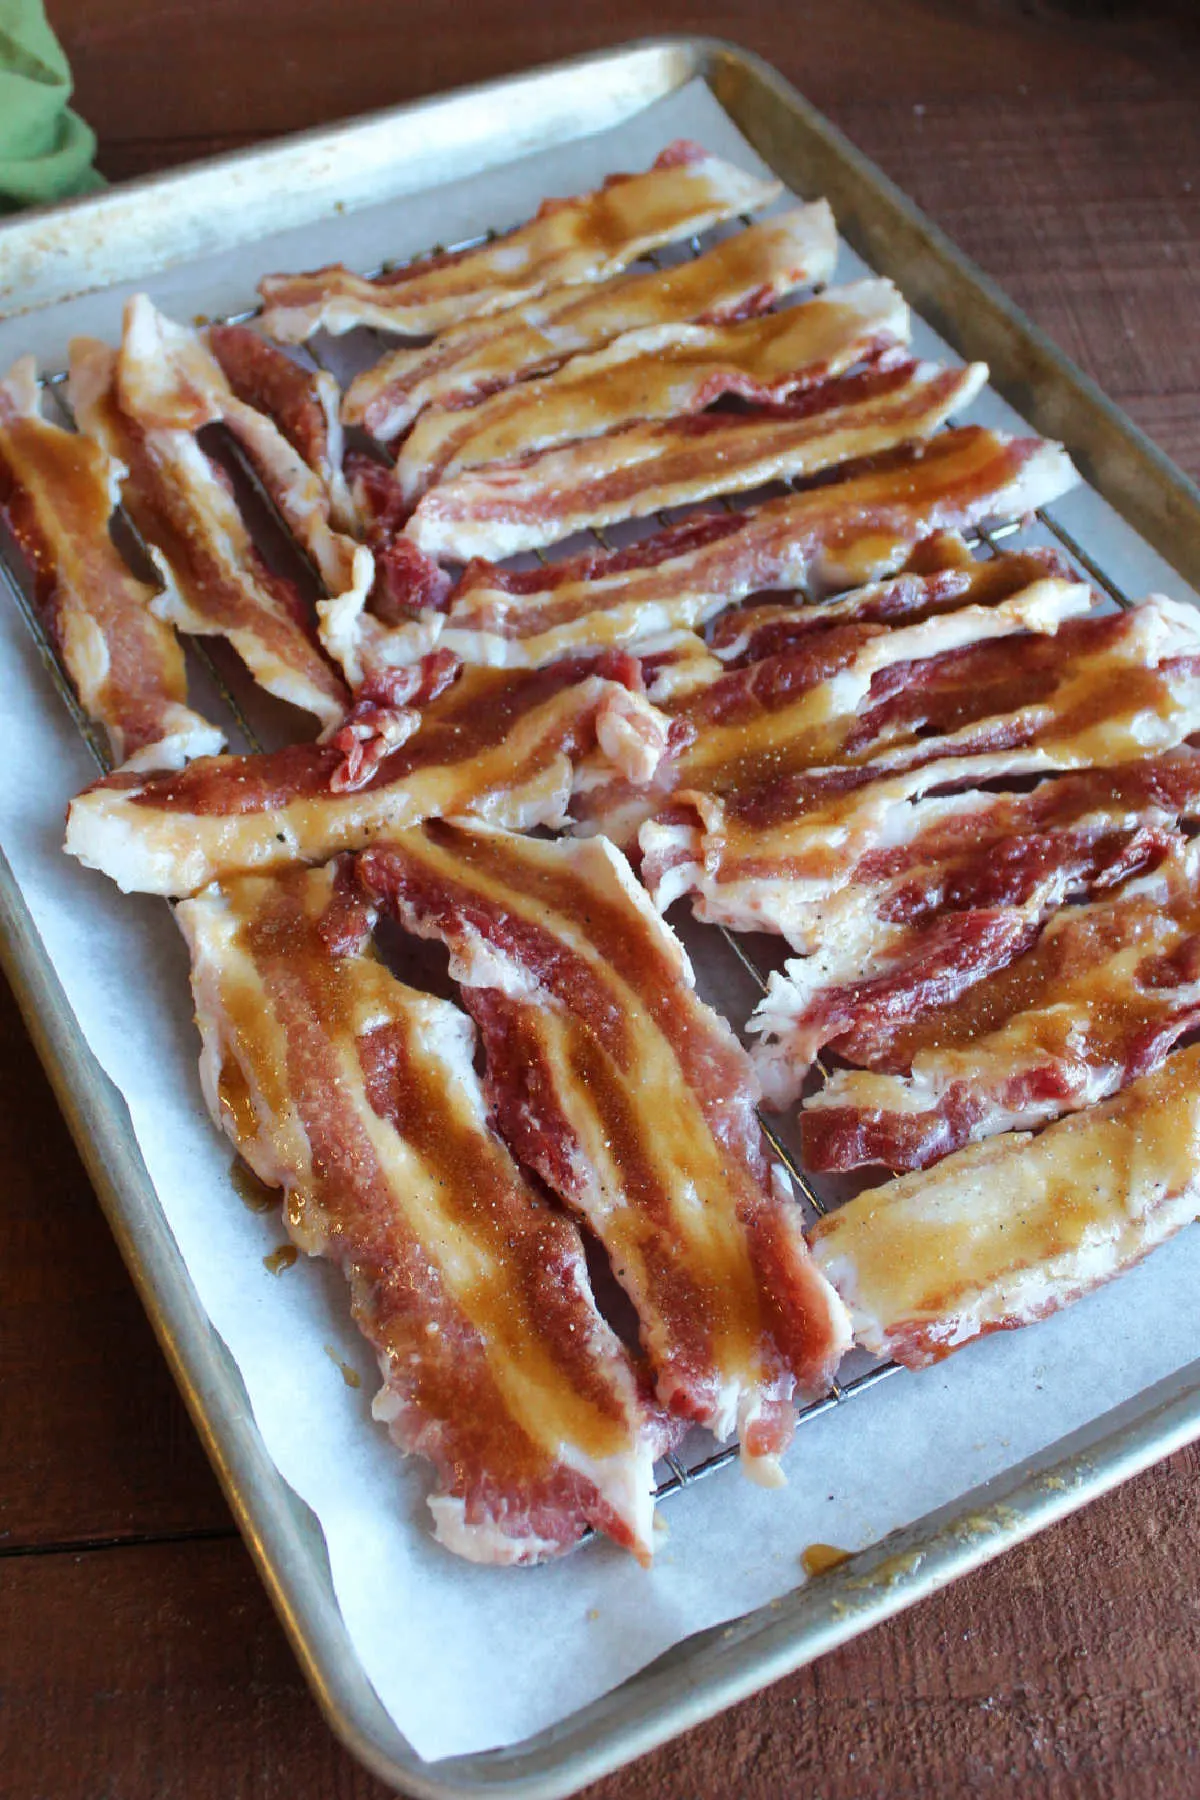 Raw bacon strips coated in maple and brown sugar mixture arranged on wire rack over parchment lined rimmed baking sheet.